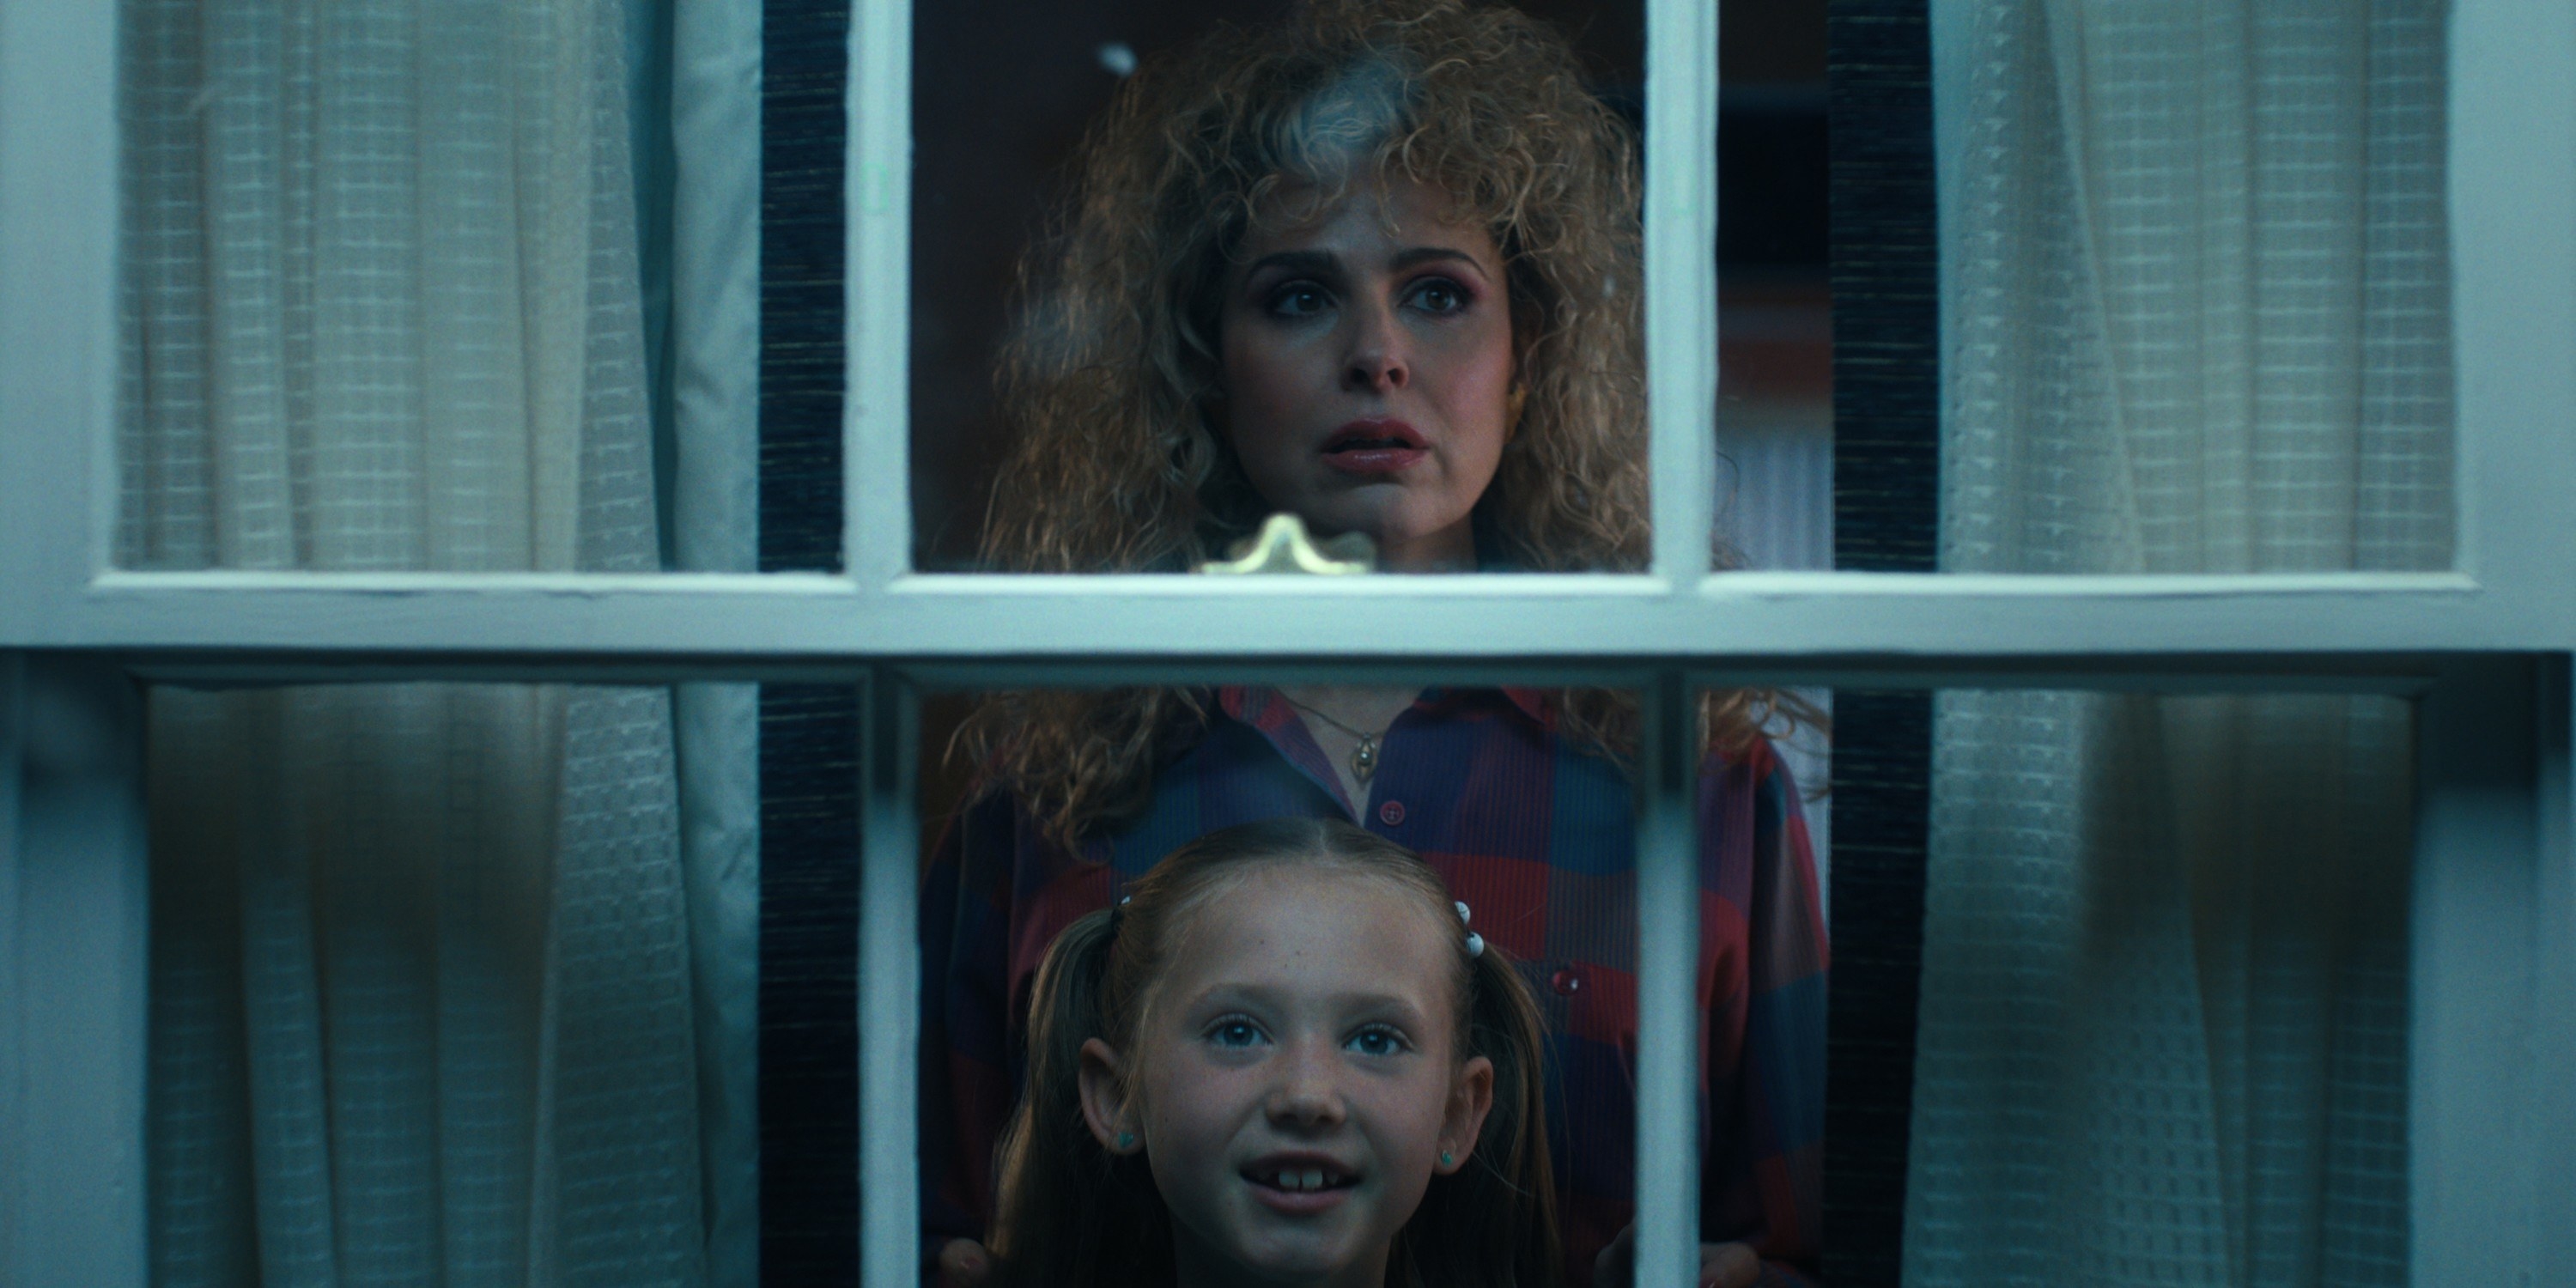 Cara Buono and a little girl looking out the window in Stranger Things